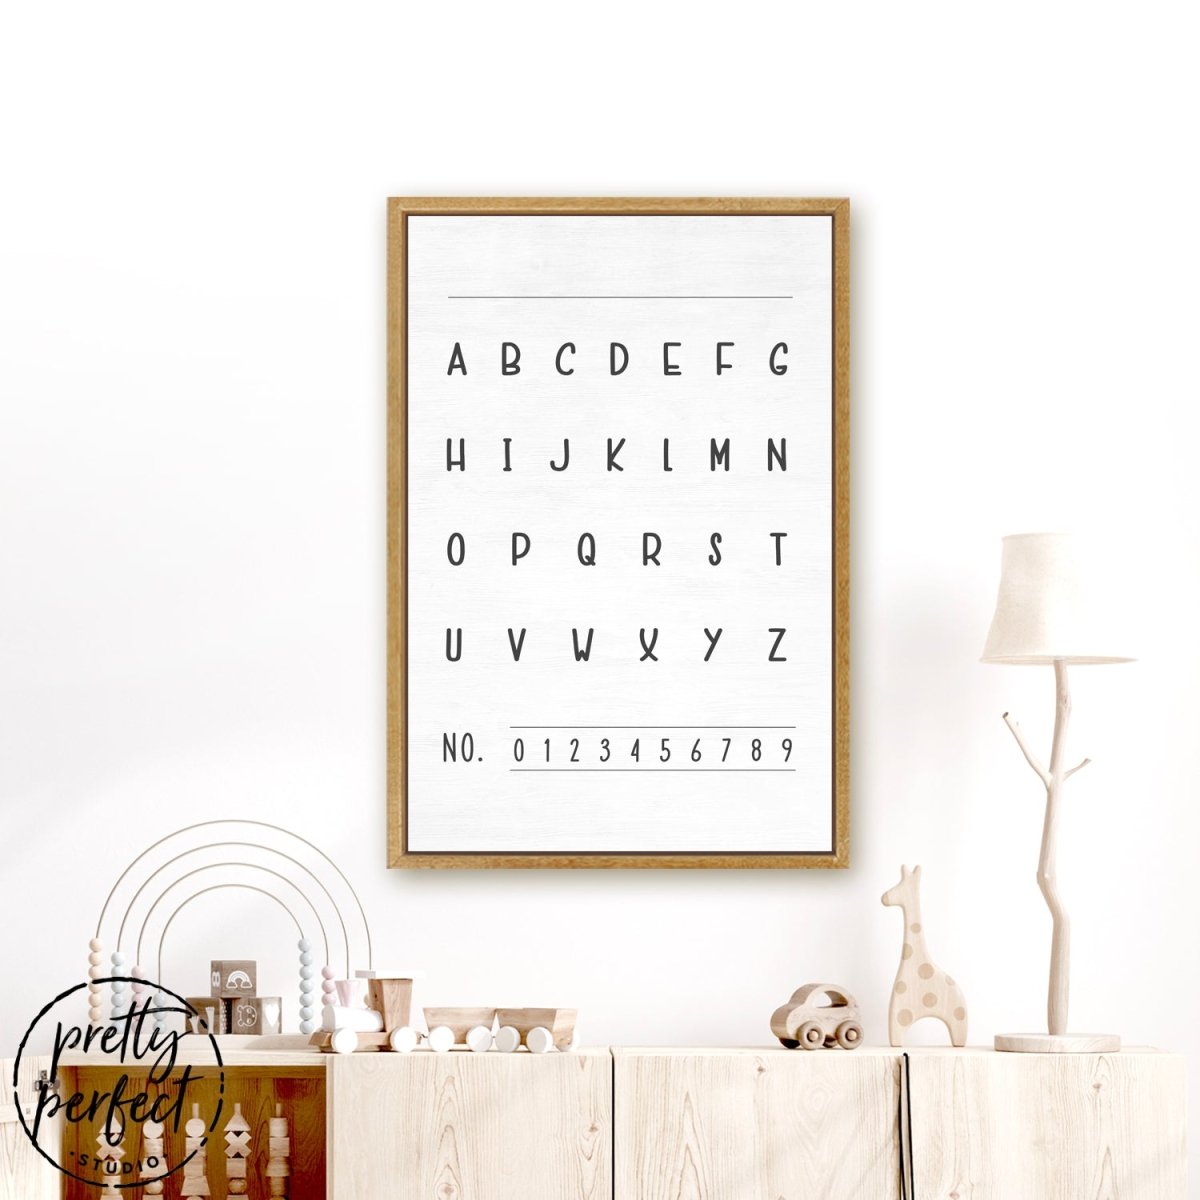 Alphabet & Number Canvas Sign Hanging in Playroom - Pretty Perfect Studio